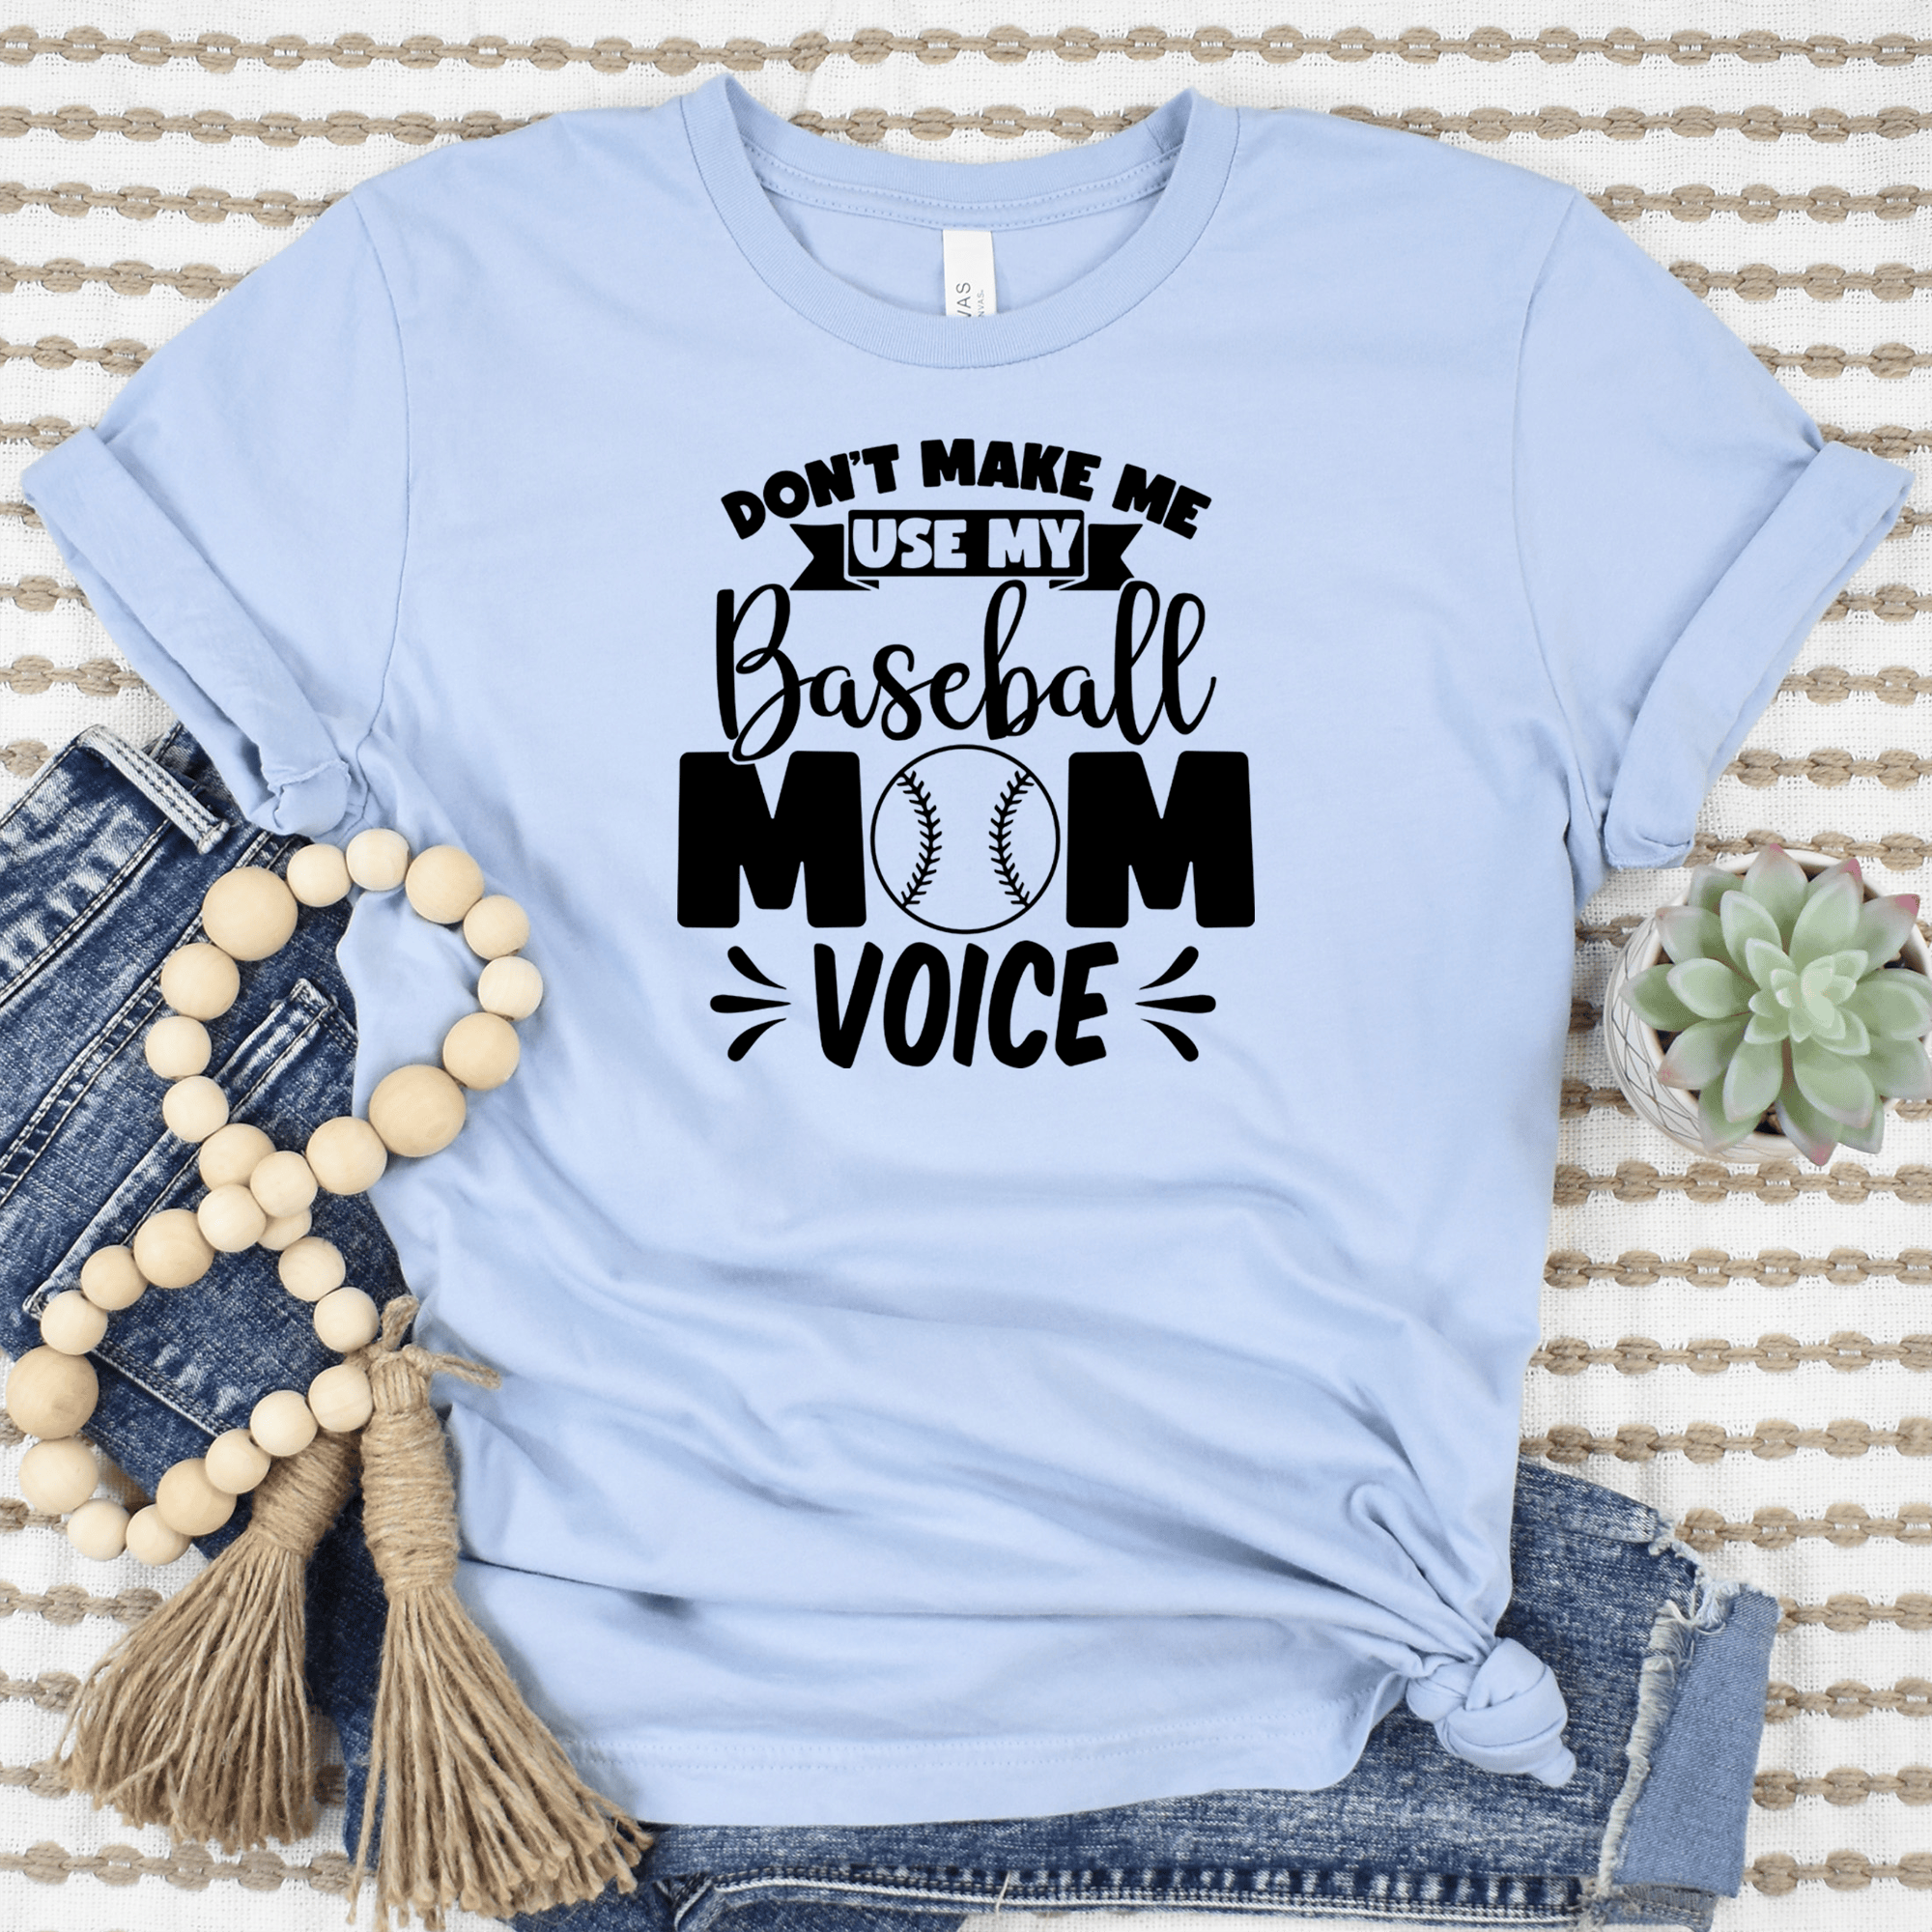 Womens Light Blue T Shirt with Ill-Use-My-Baseball-Mom-Voice design